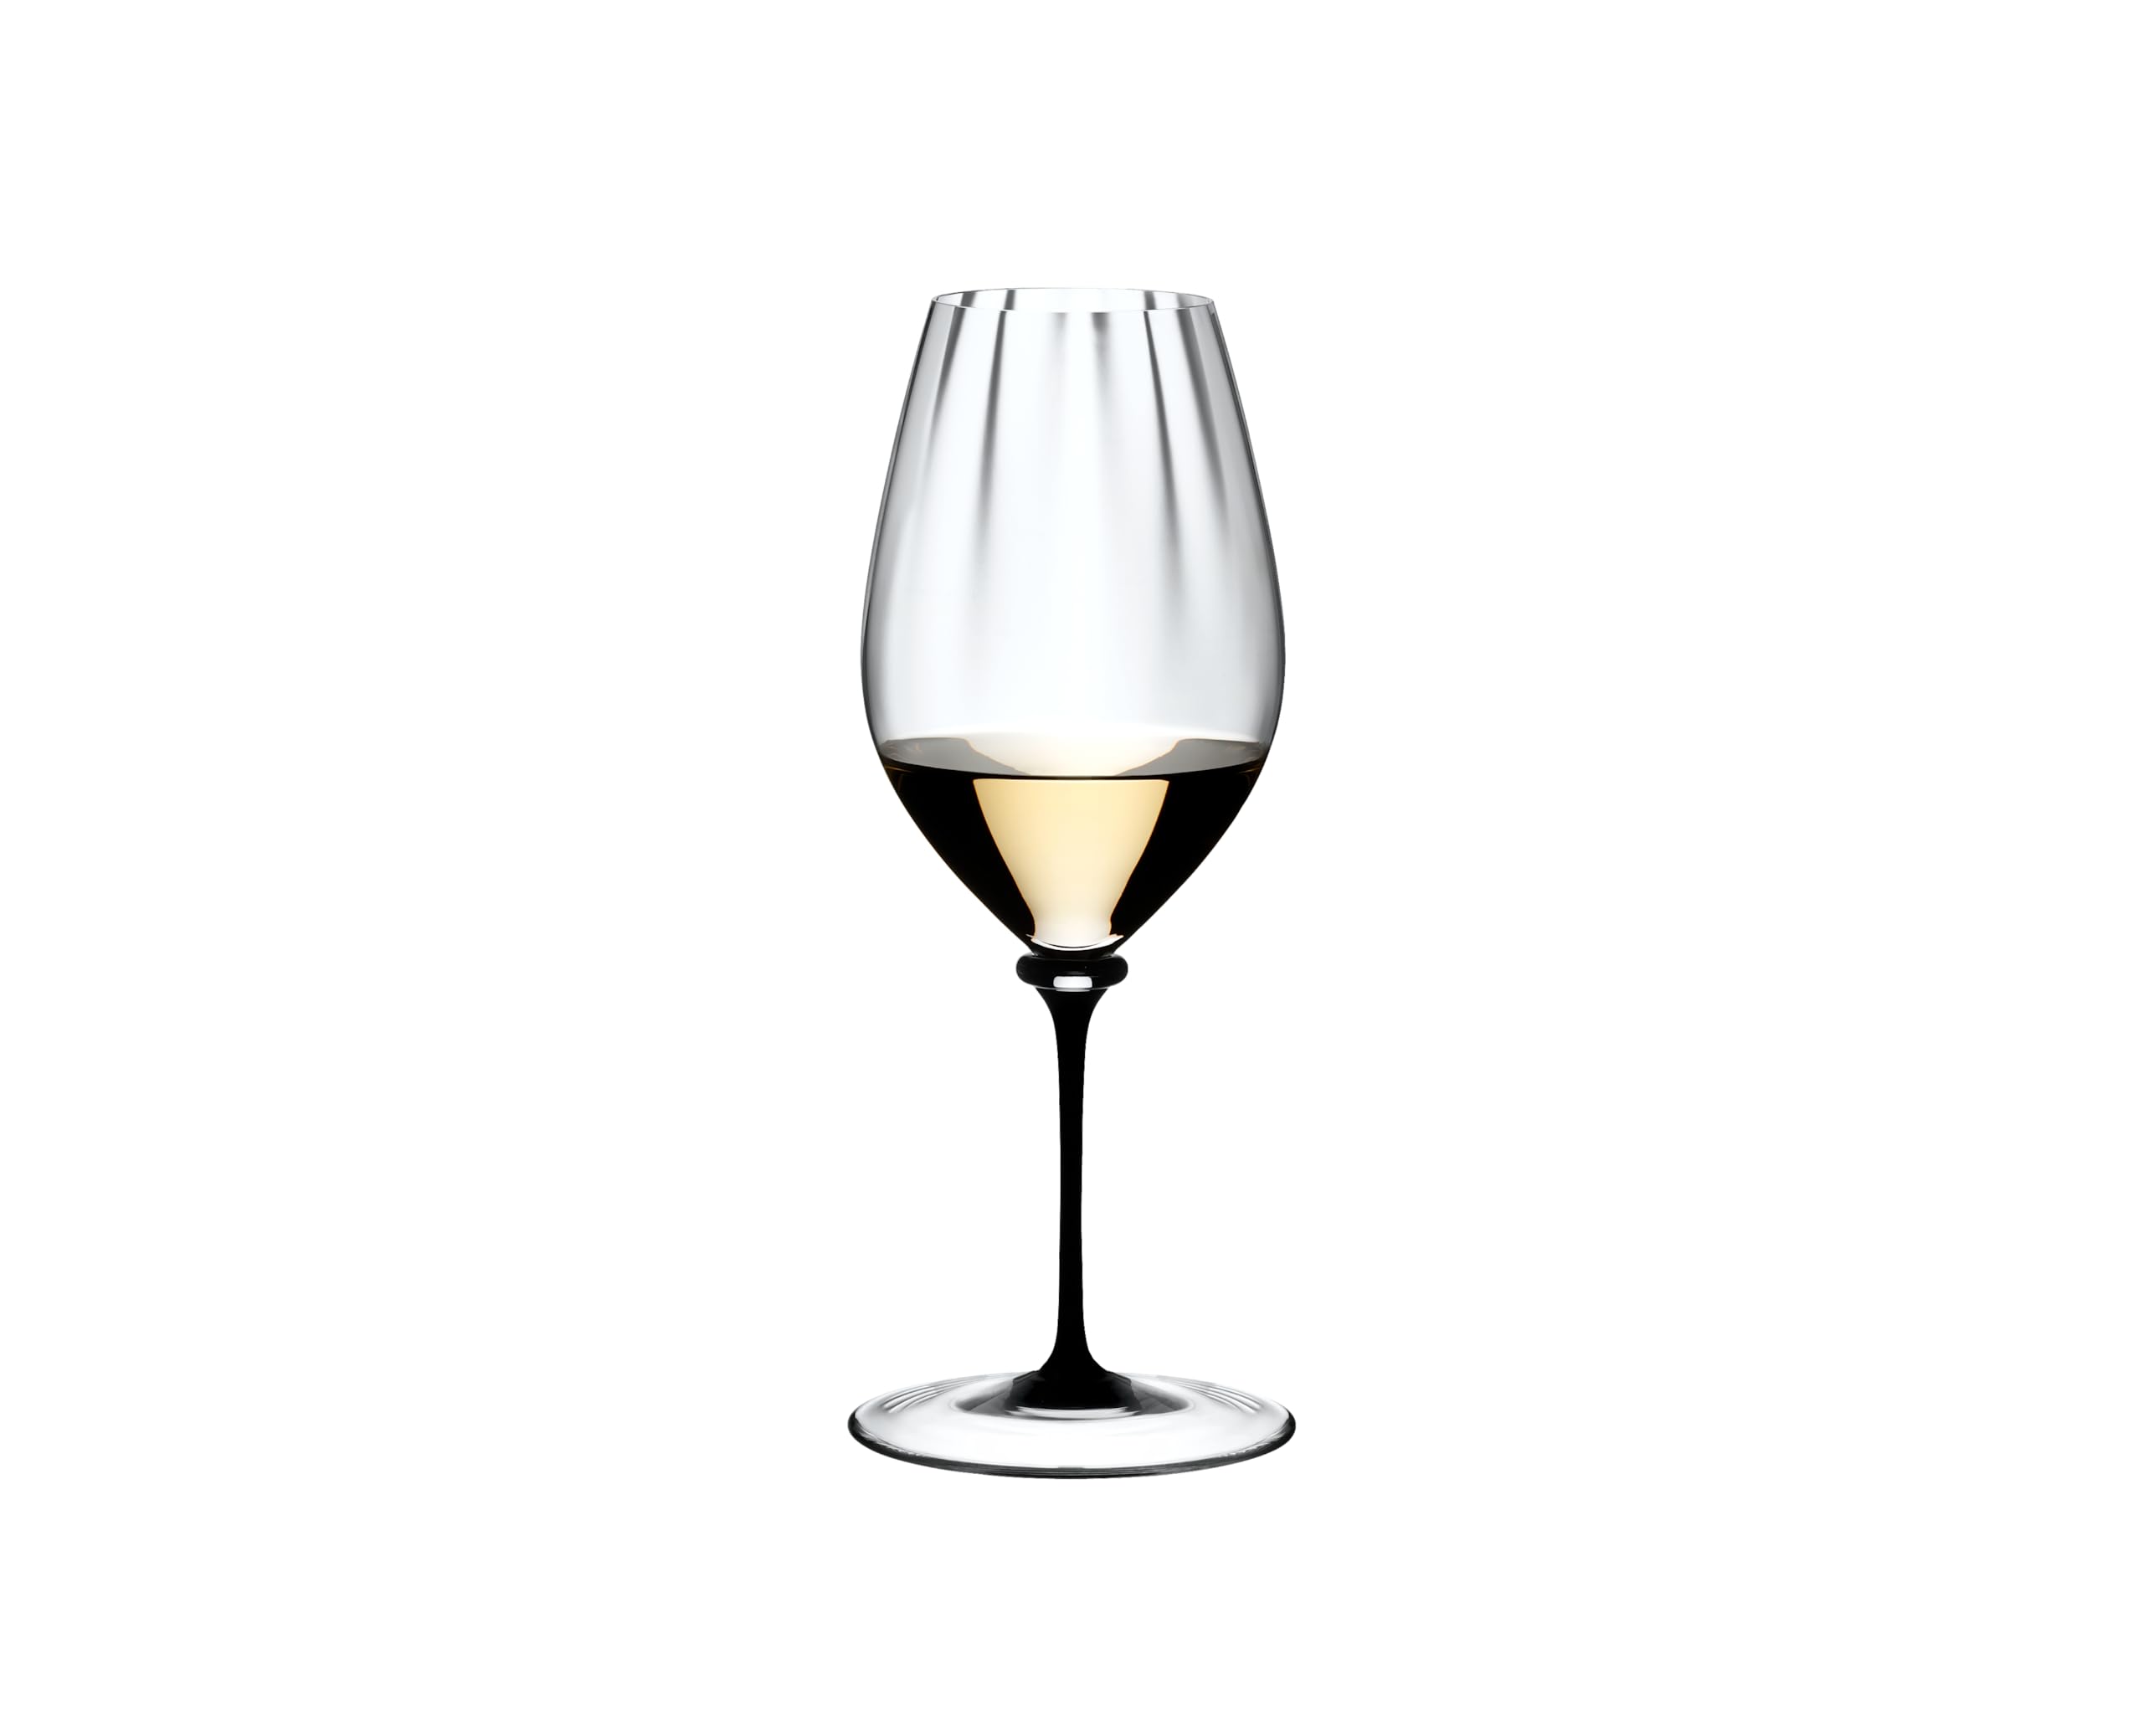 Riedel 4884/15 D Fatto A Mano Performance Riesling Weinglas, 600 ml, transparent